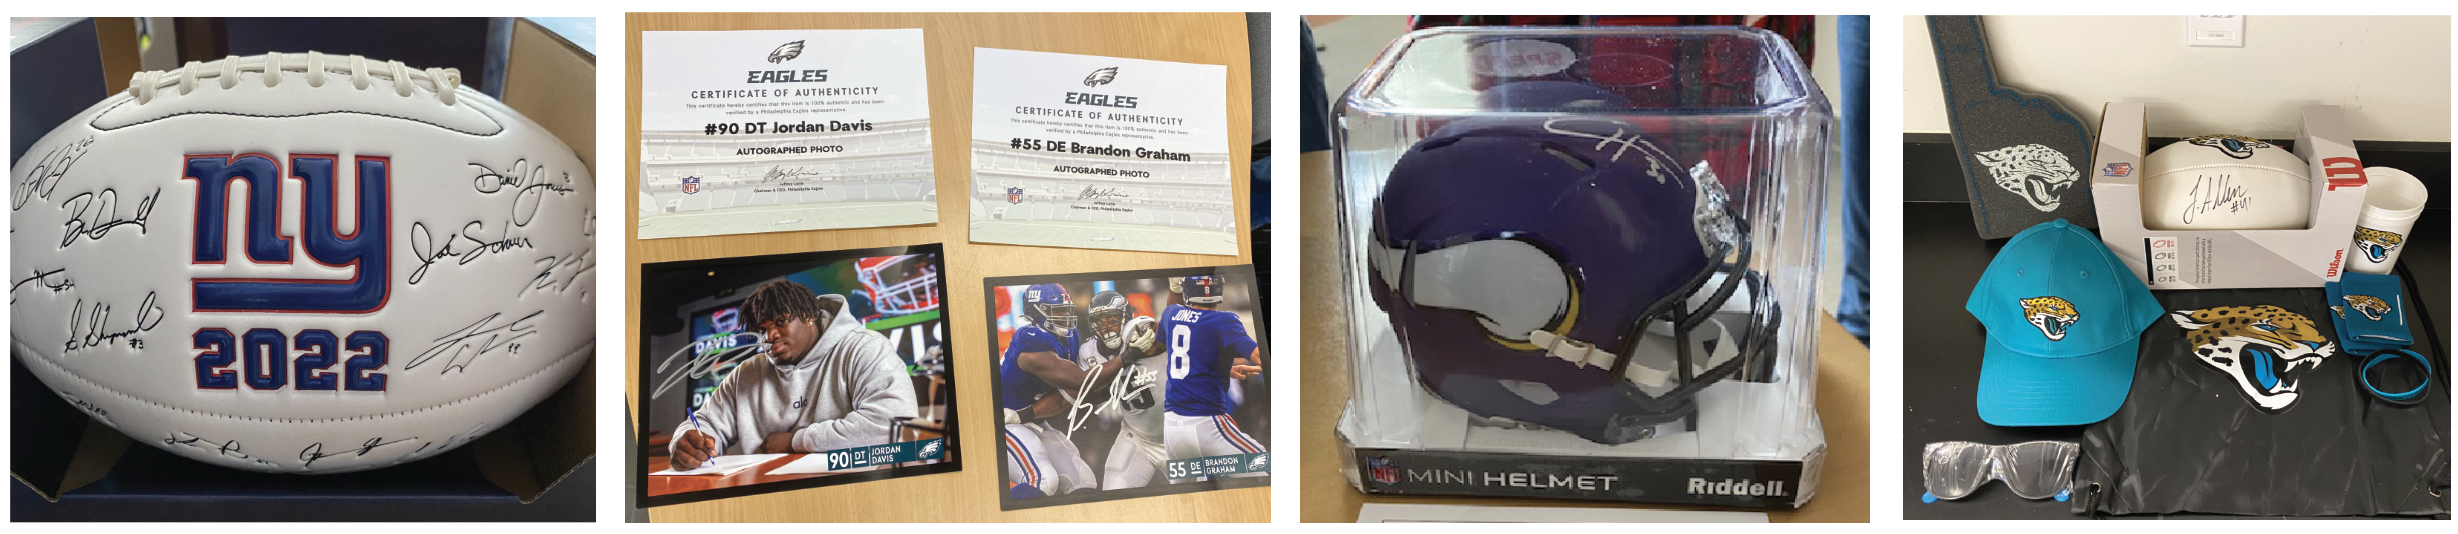 a signed football, posters, a mini helmet, and other football memorabilia was donated 